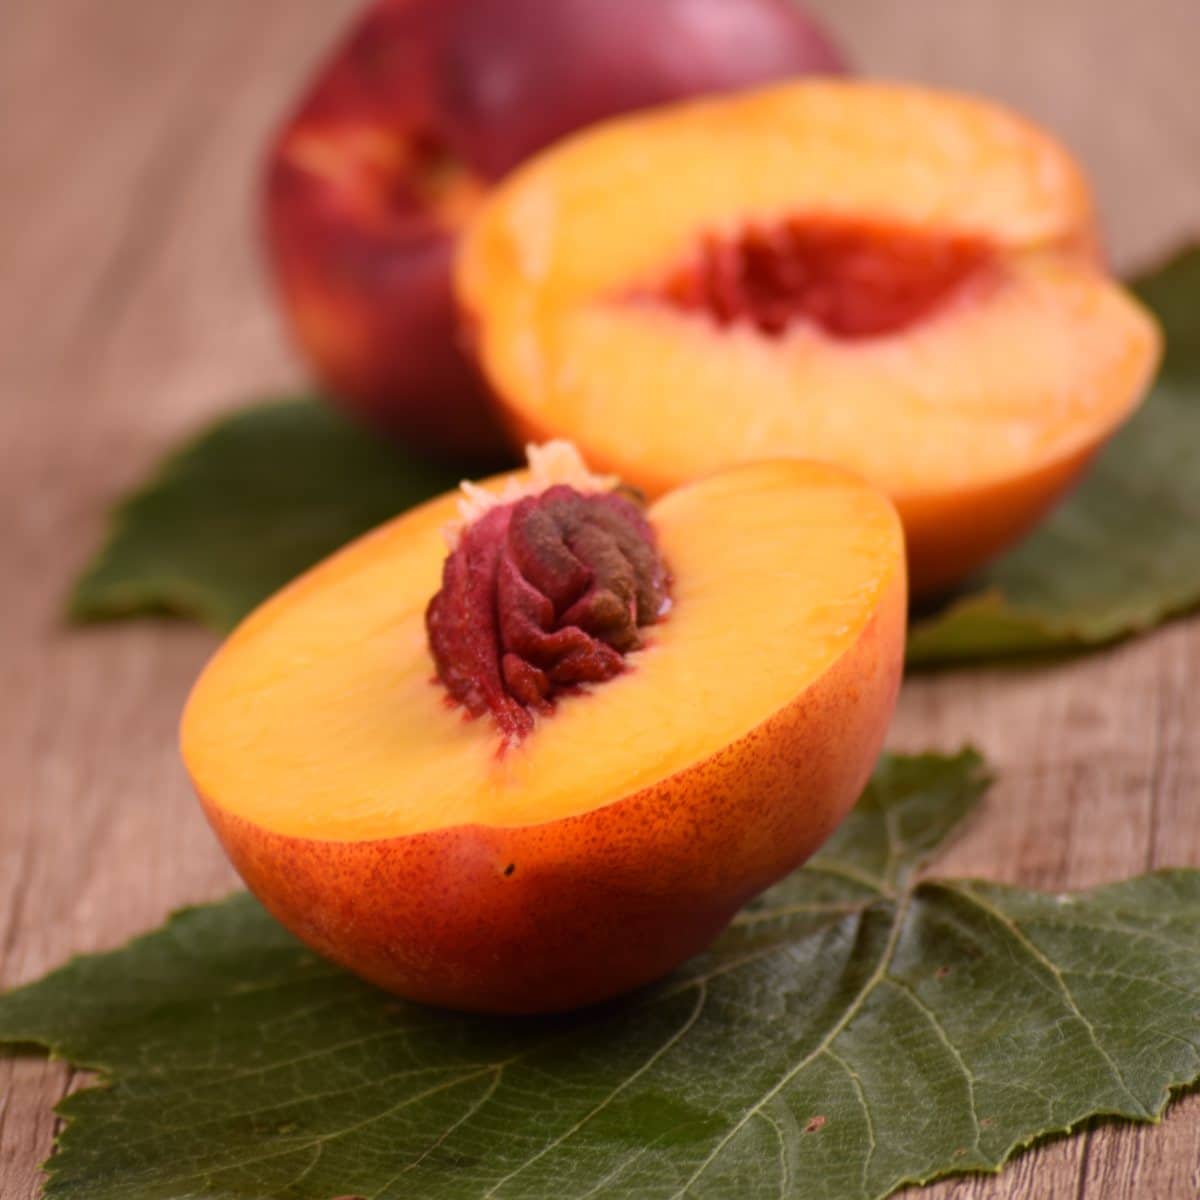 landen voorzetsel Fitness Nectarine - health benefits and therapeutic value for this peach-like fruit